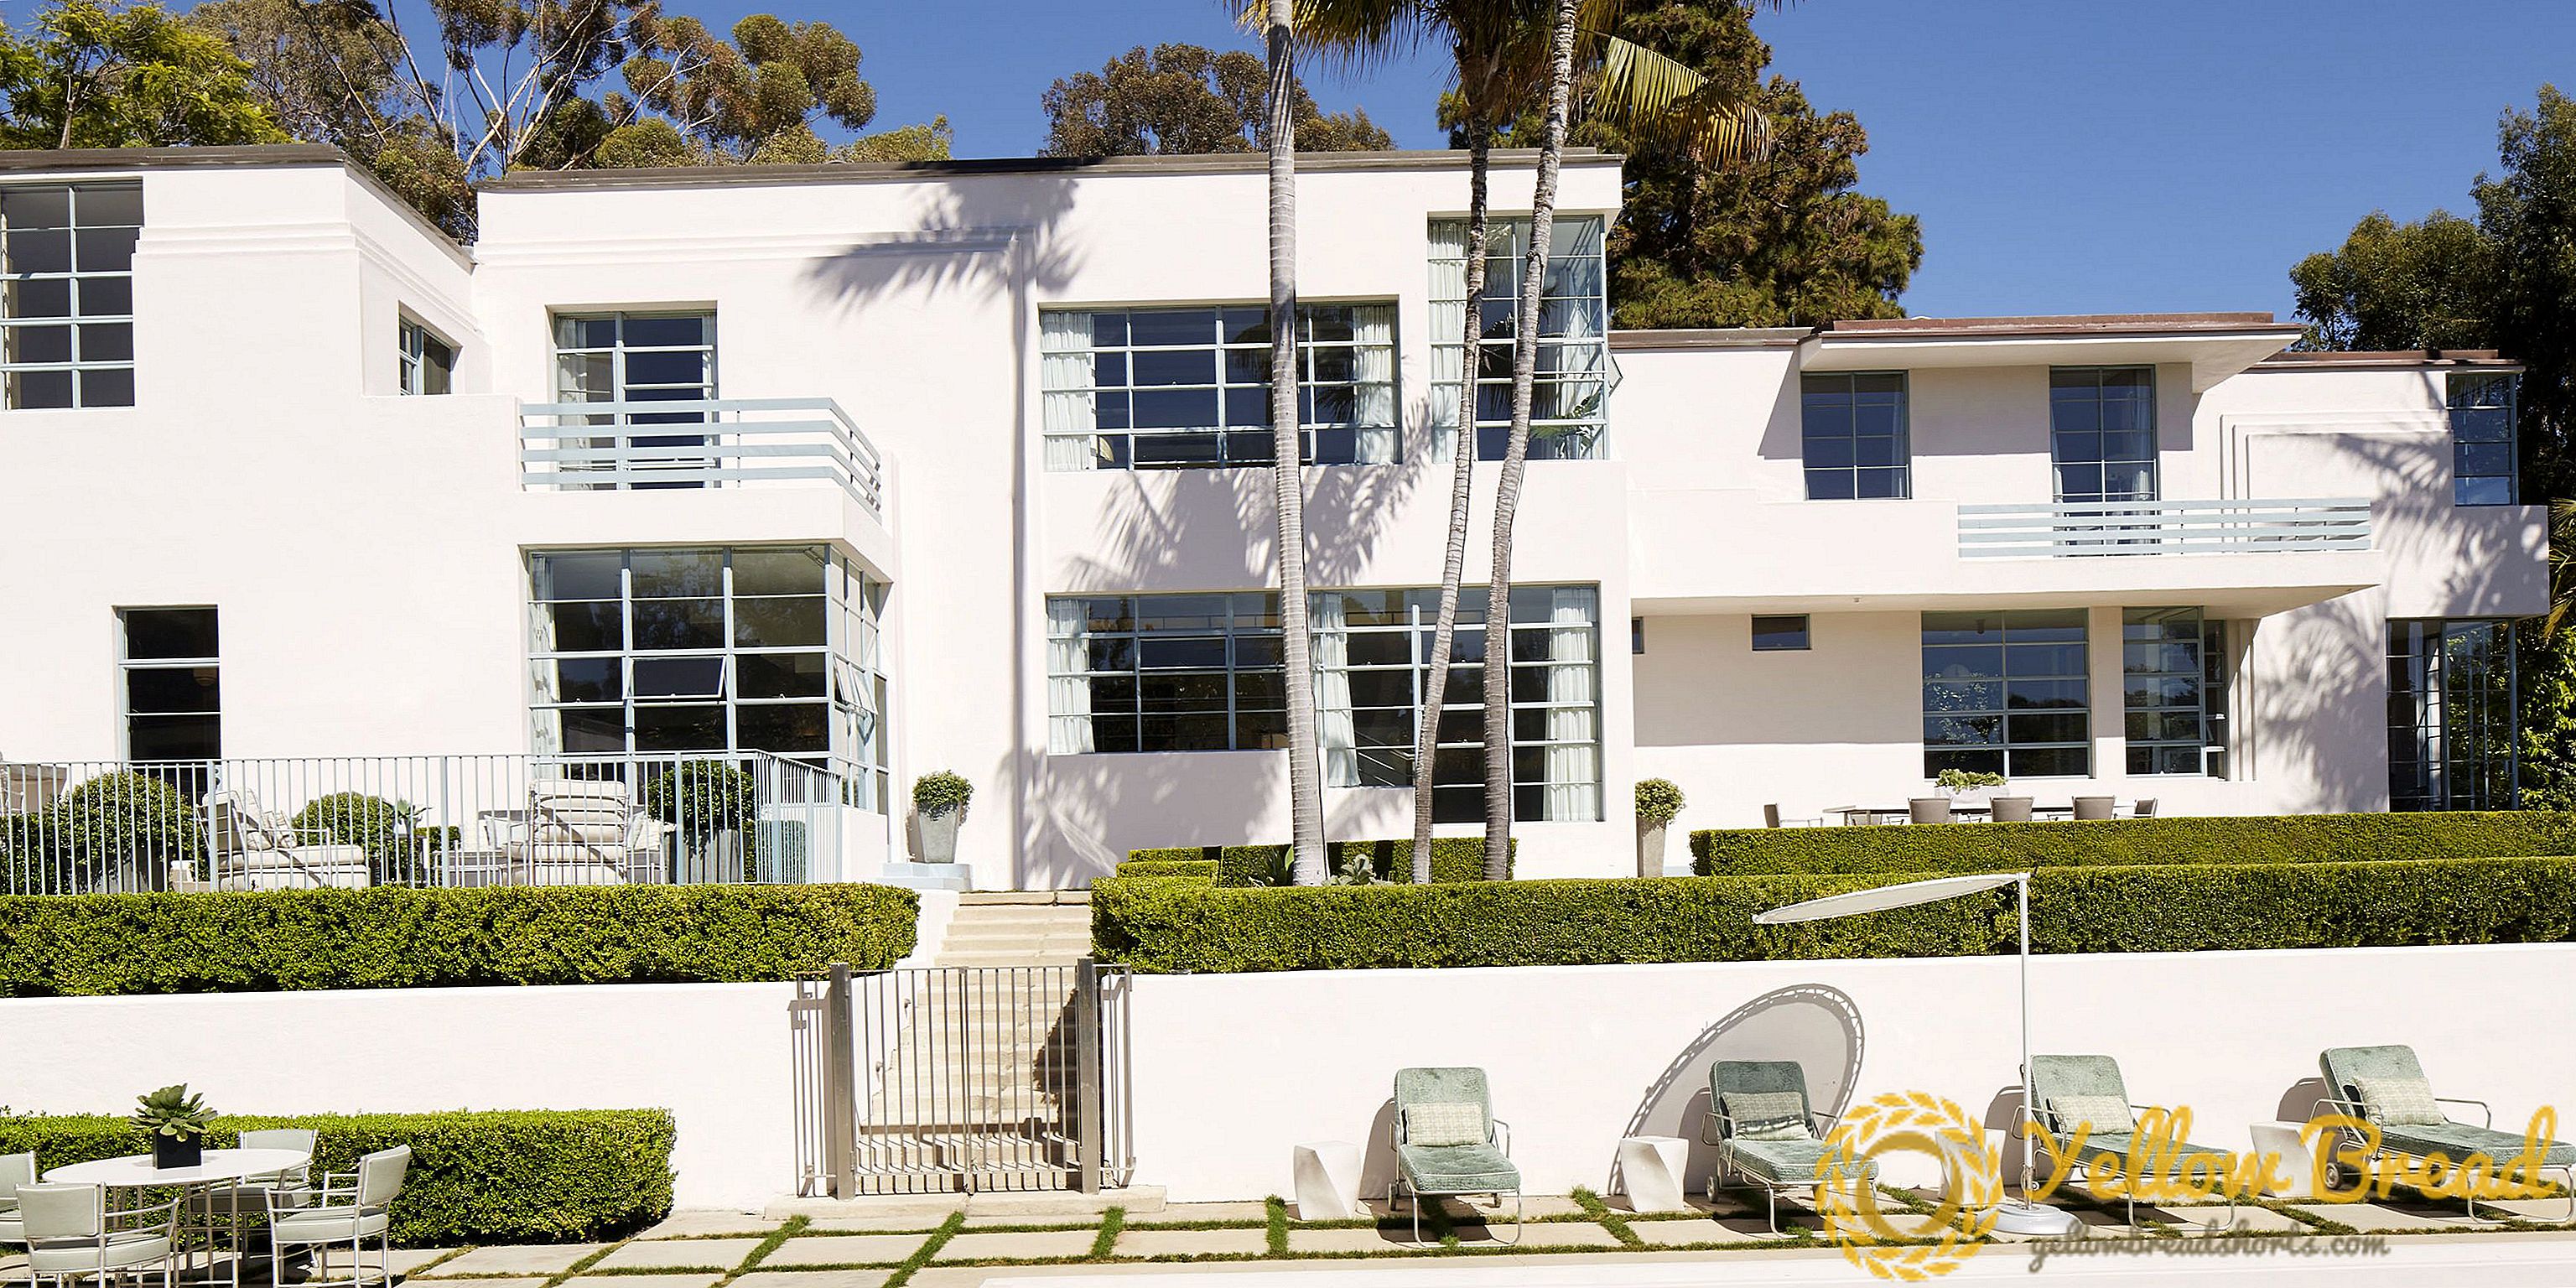 HOUSE TOUR: An Art Deco Home That Honors Its Old Hollywood Legacy